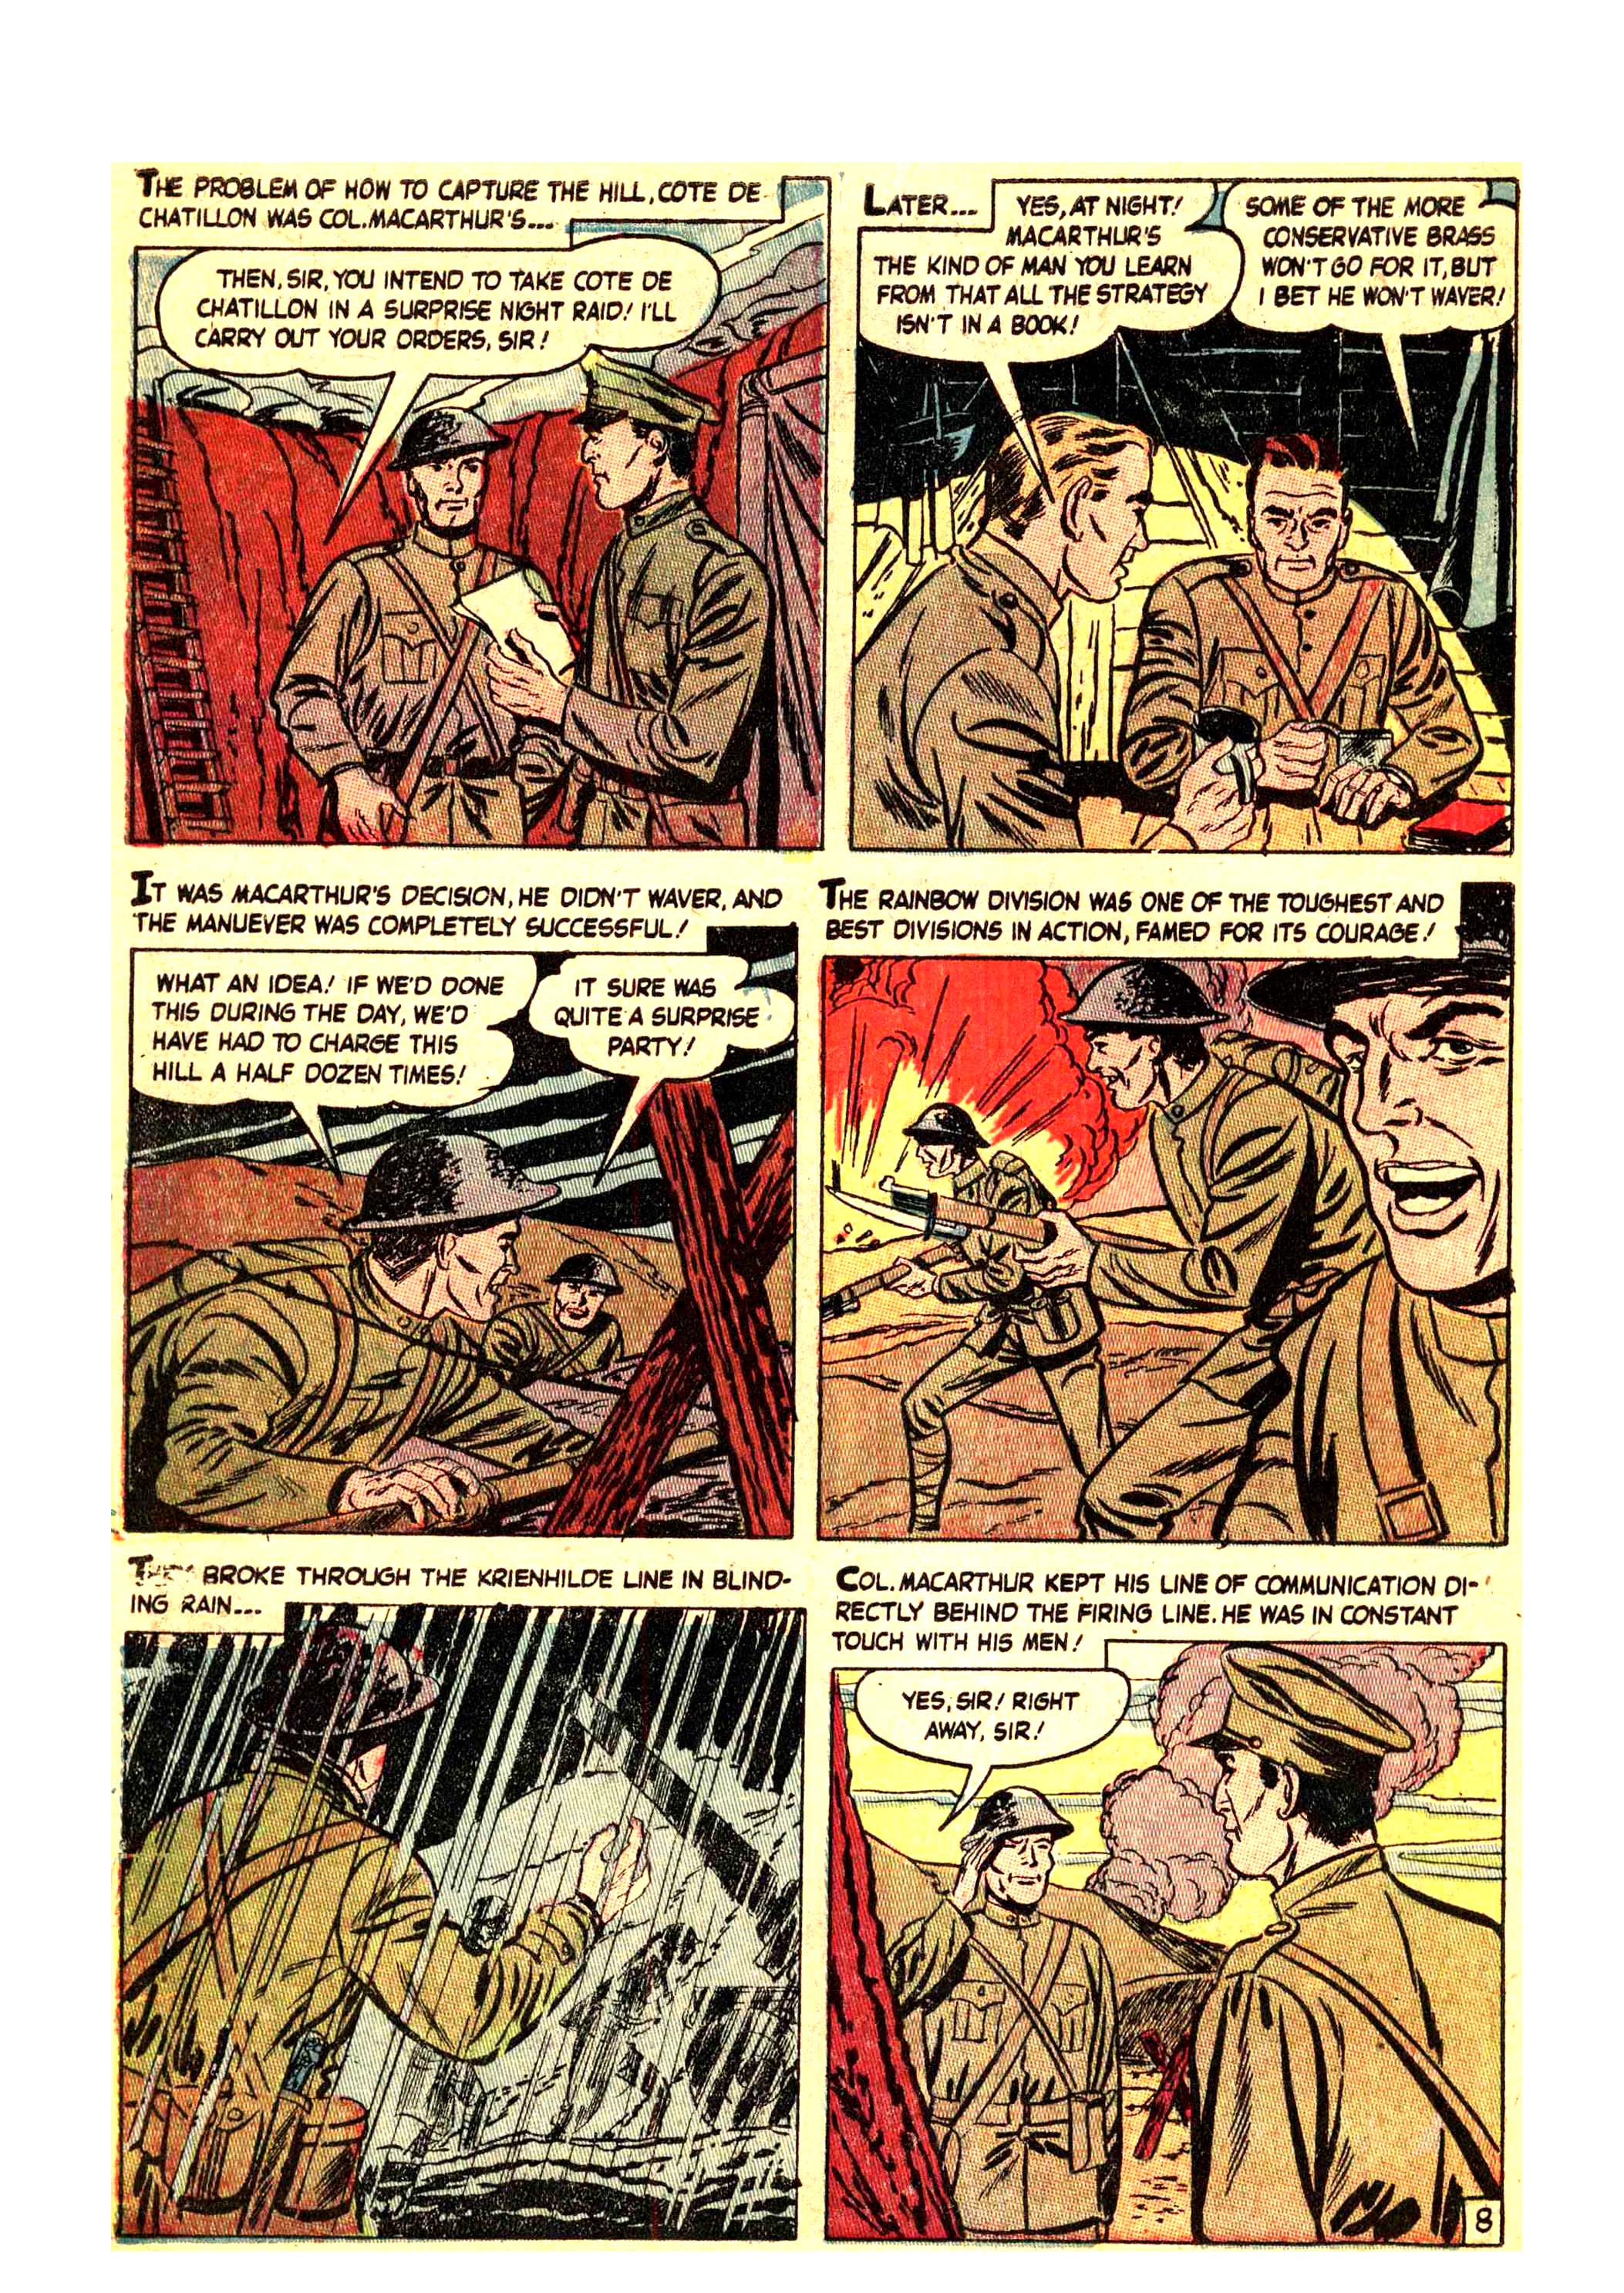 Read online MacArthur: The Great American comic -  Issue # Full - 10